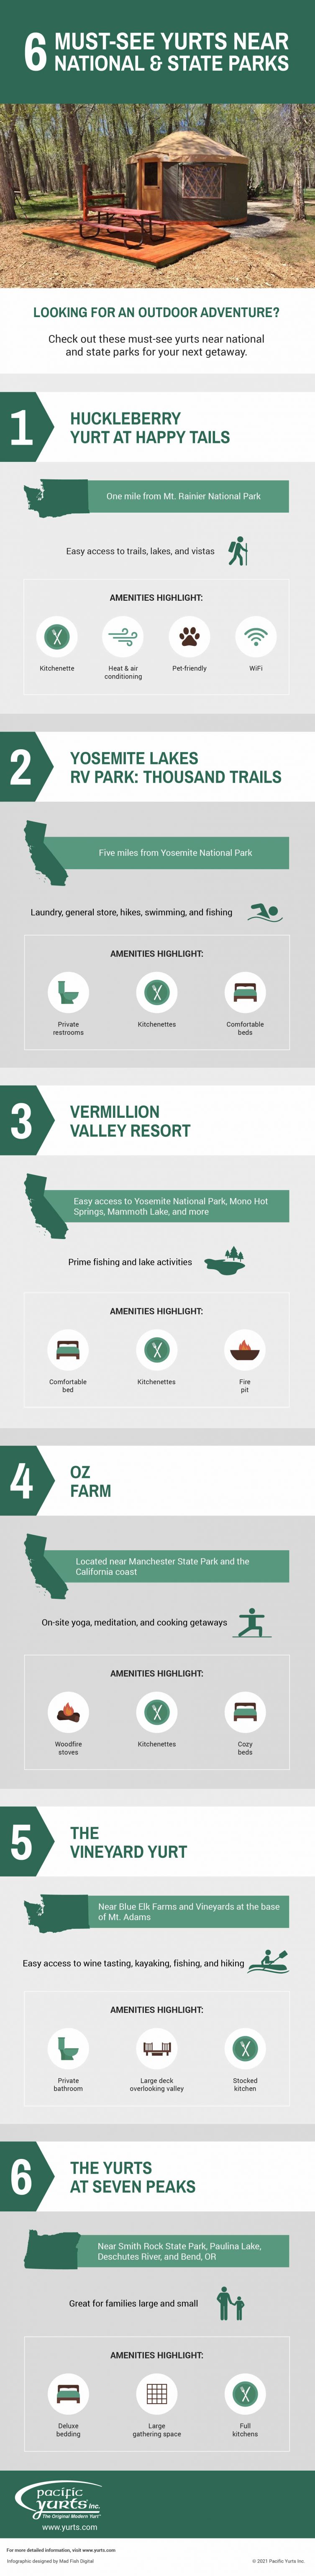 6 must see yurts near national and state parks infographic